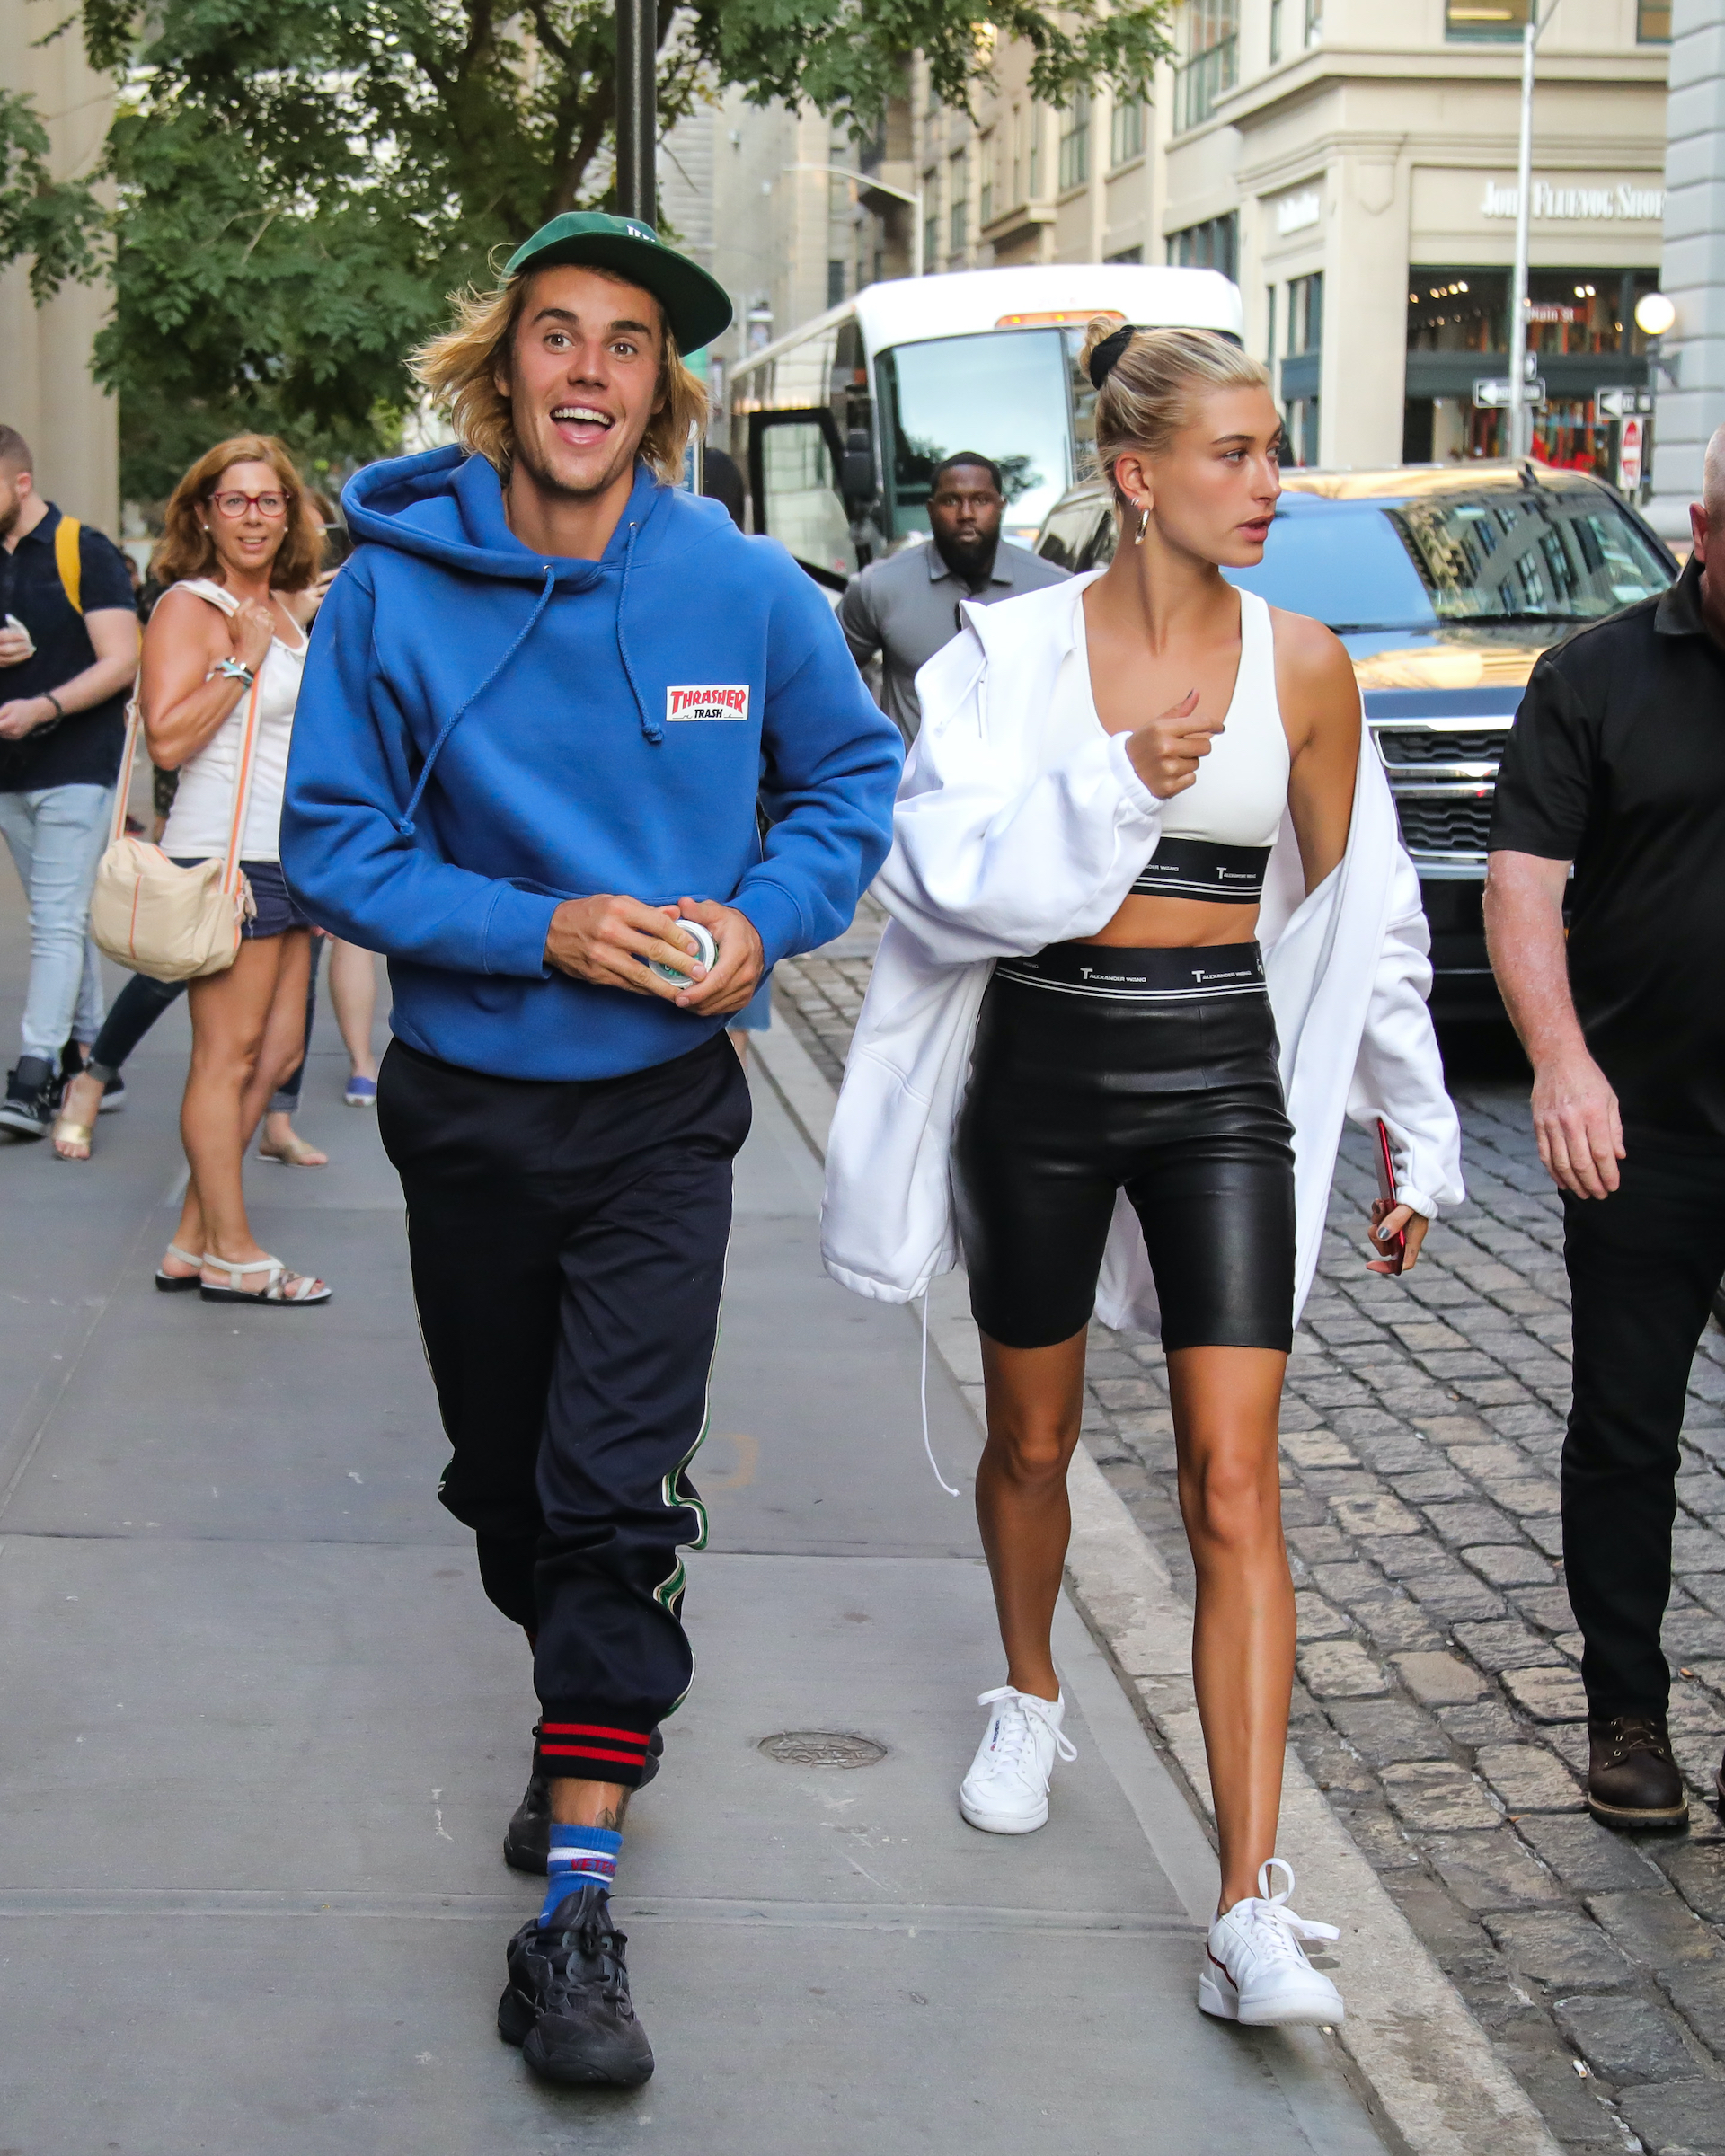 In the latest episode of the hit podcast "Call Her Daddy," Hailey Bieber finally speaks out about the rumors circling her husband, Justin Bieber, and his ex-girlfriend, Selena Gomez.